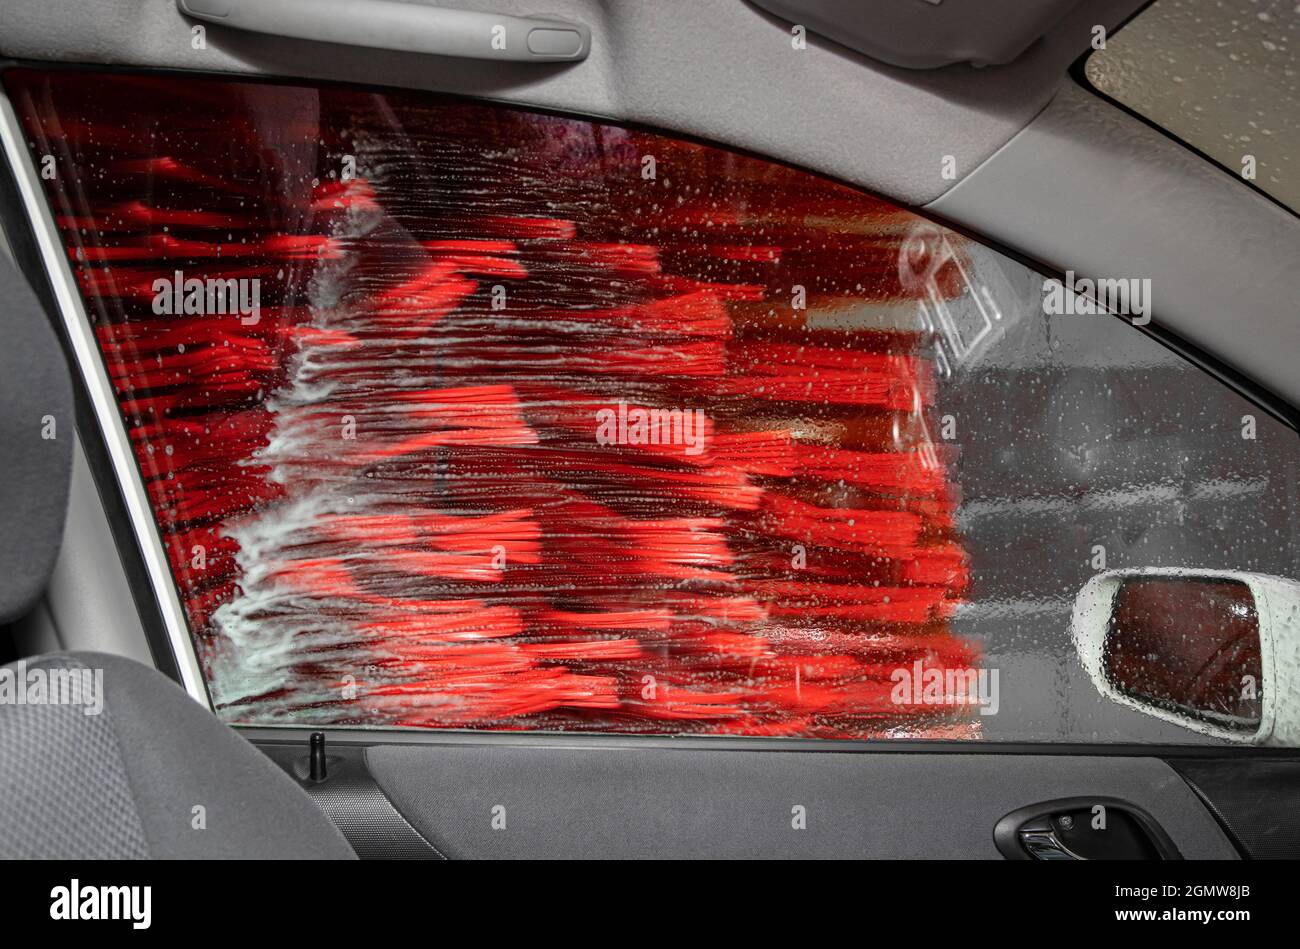 Looking out the passenger window inside automate car wash service, brushes are spinning and cleaning the car. Car wash concept. Stock Photo